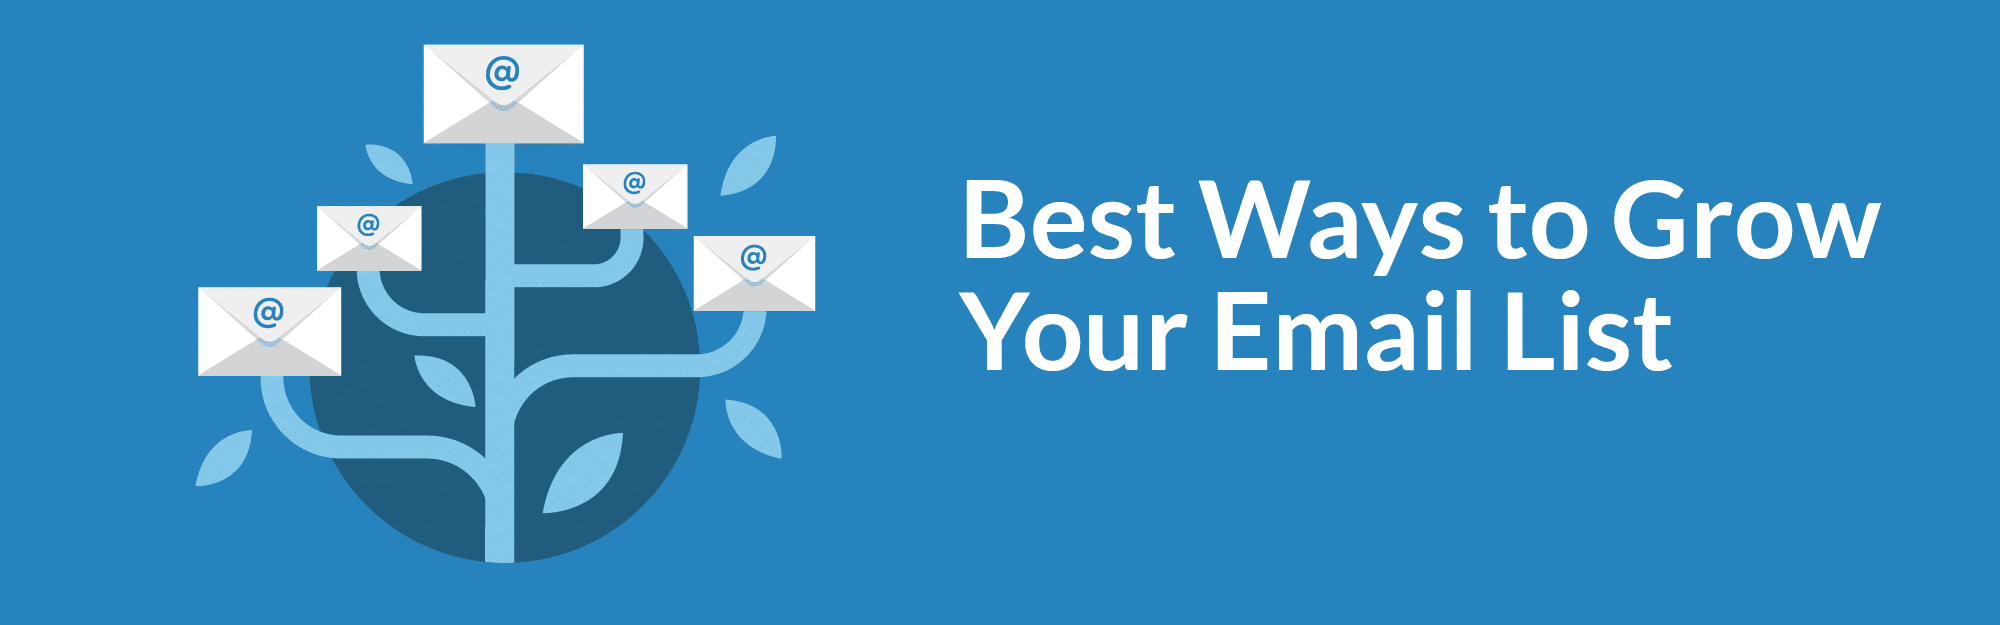 6-great-ways-to-grow-your-email-list